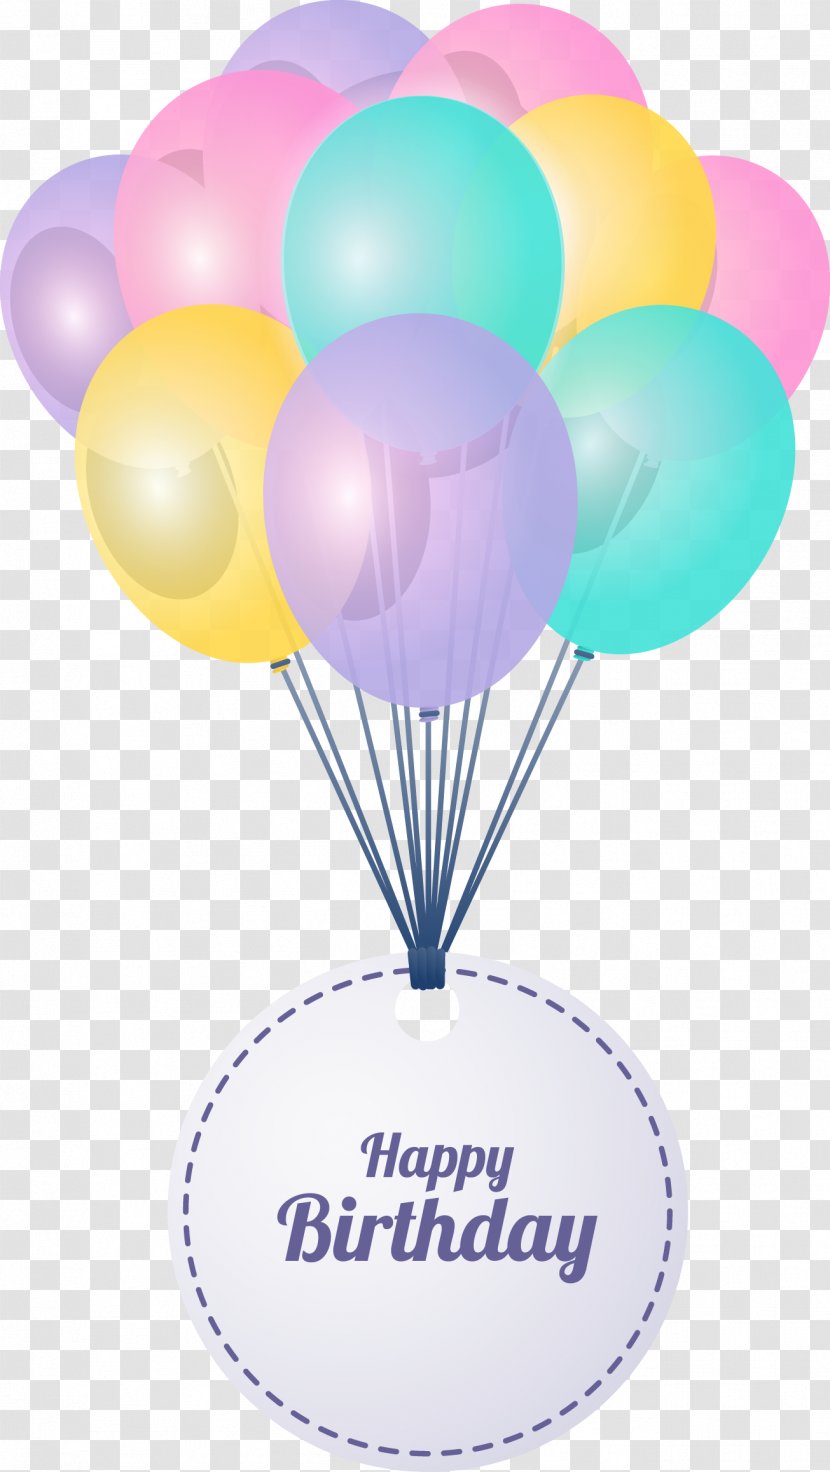 Balloon - Software - Vector Hand Painted Colored Balloons Transparent PNG